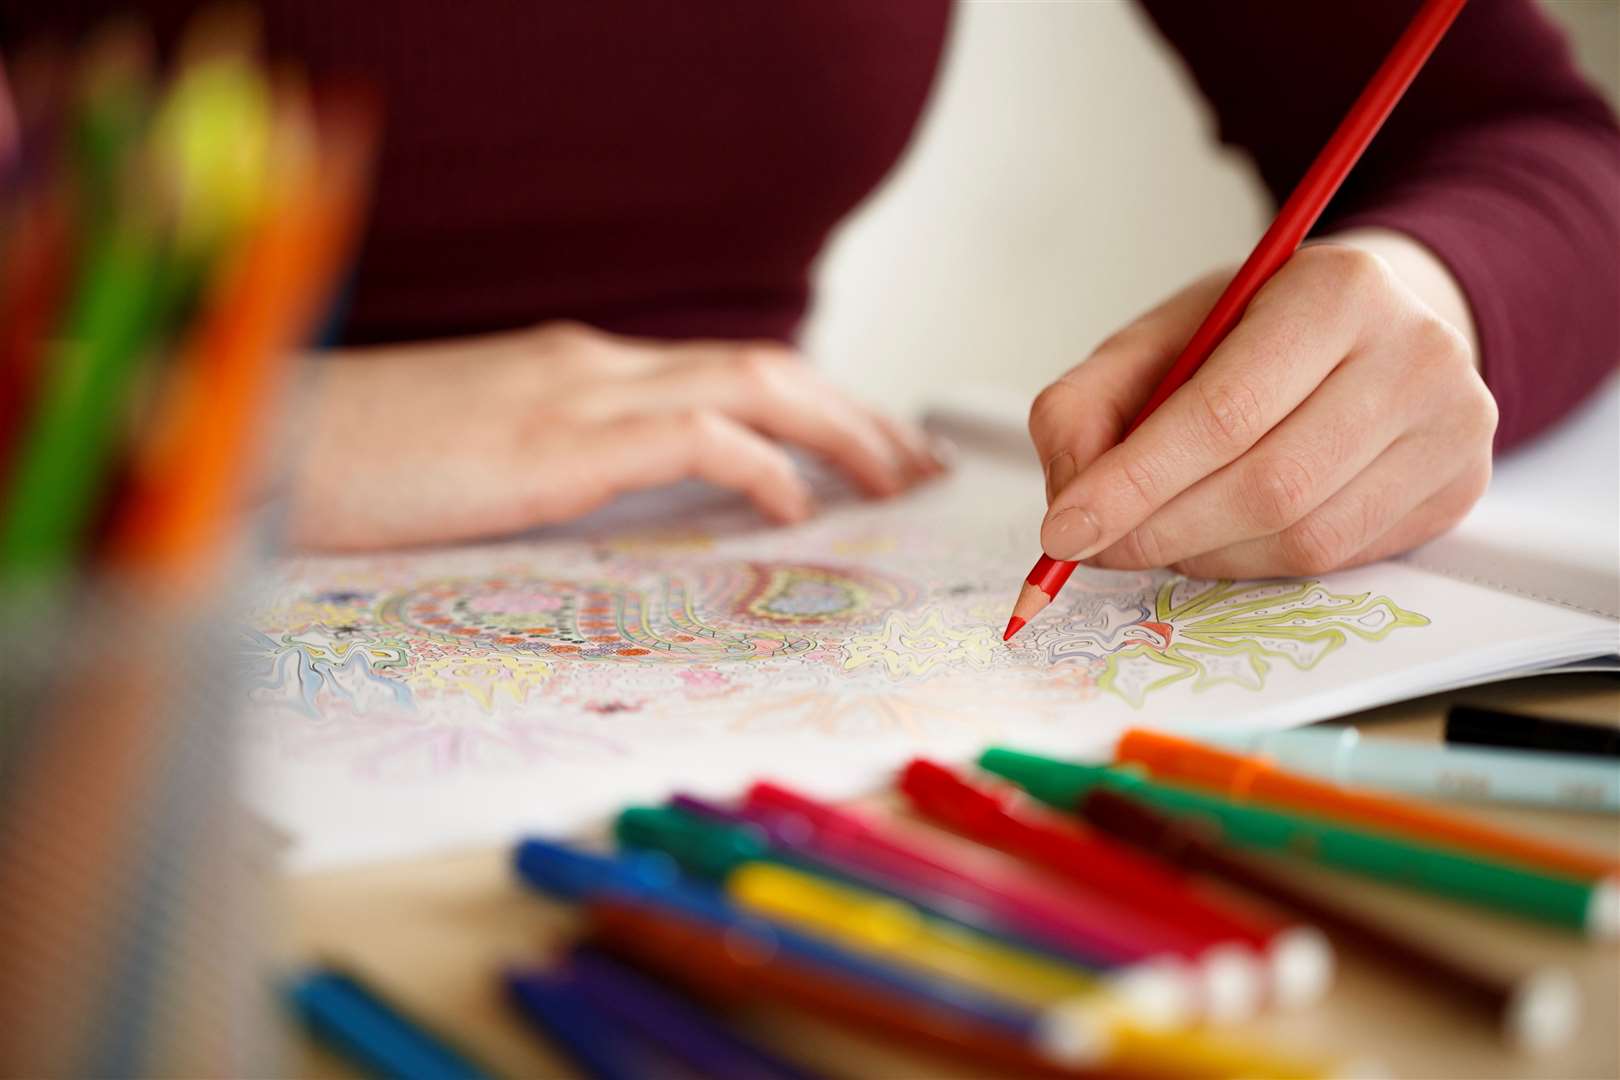 Have you heard of colouring-in books for adults?